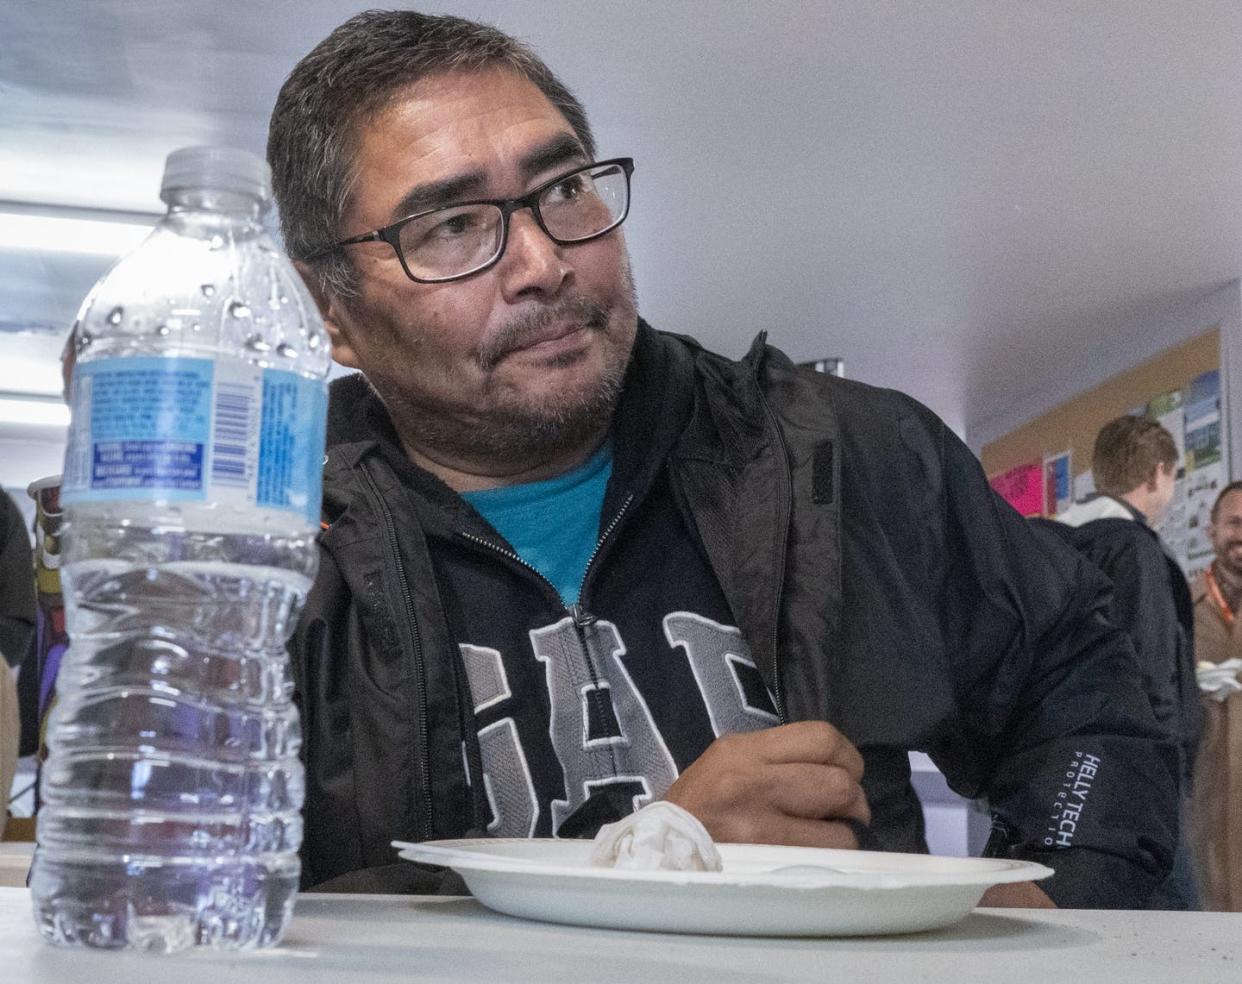 <span class="caption">A water bottle sits on the table in front of Chief and NDP candidate Rudy Turtle during a visit by NDP Leader Jagmeet Singh on Oct. 5, 2019 on the Grassy Narrows First Nation, where industrial mercury poisoning in its water system has seriously affected the health of the community.</span> <span class="attribution"><span class="source">THE CANADIAN PRESS/Paul Chiasson</span></span>